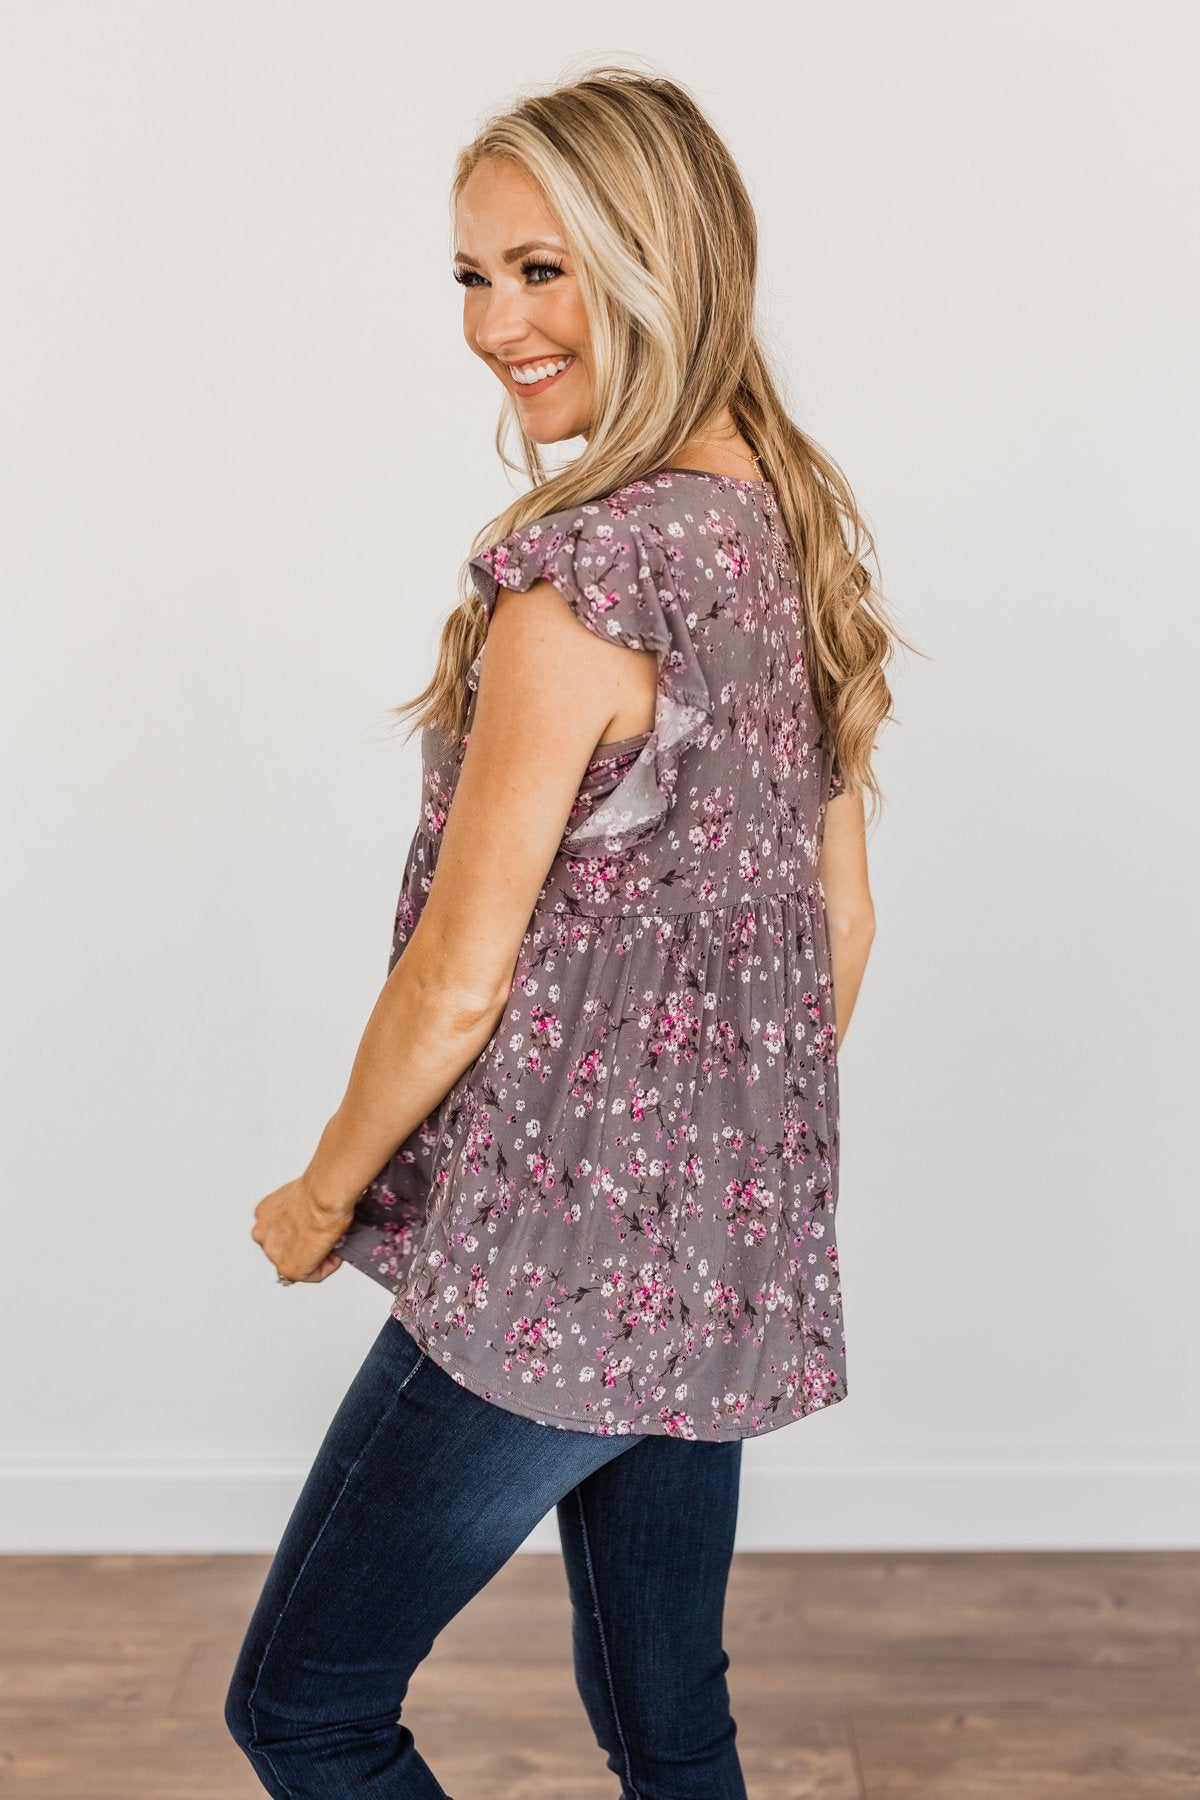 Gardens Of Flowers Floral Top- Grey & Pink